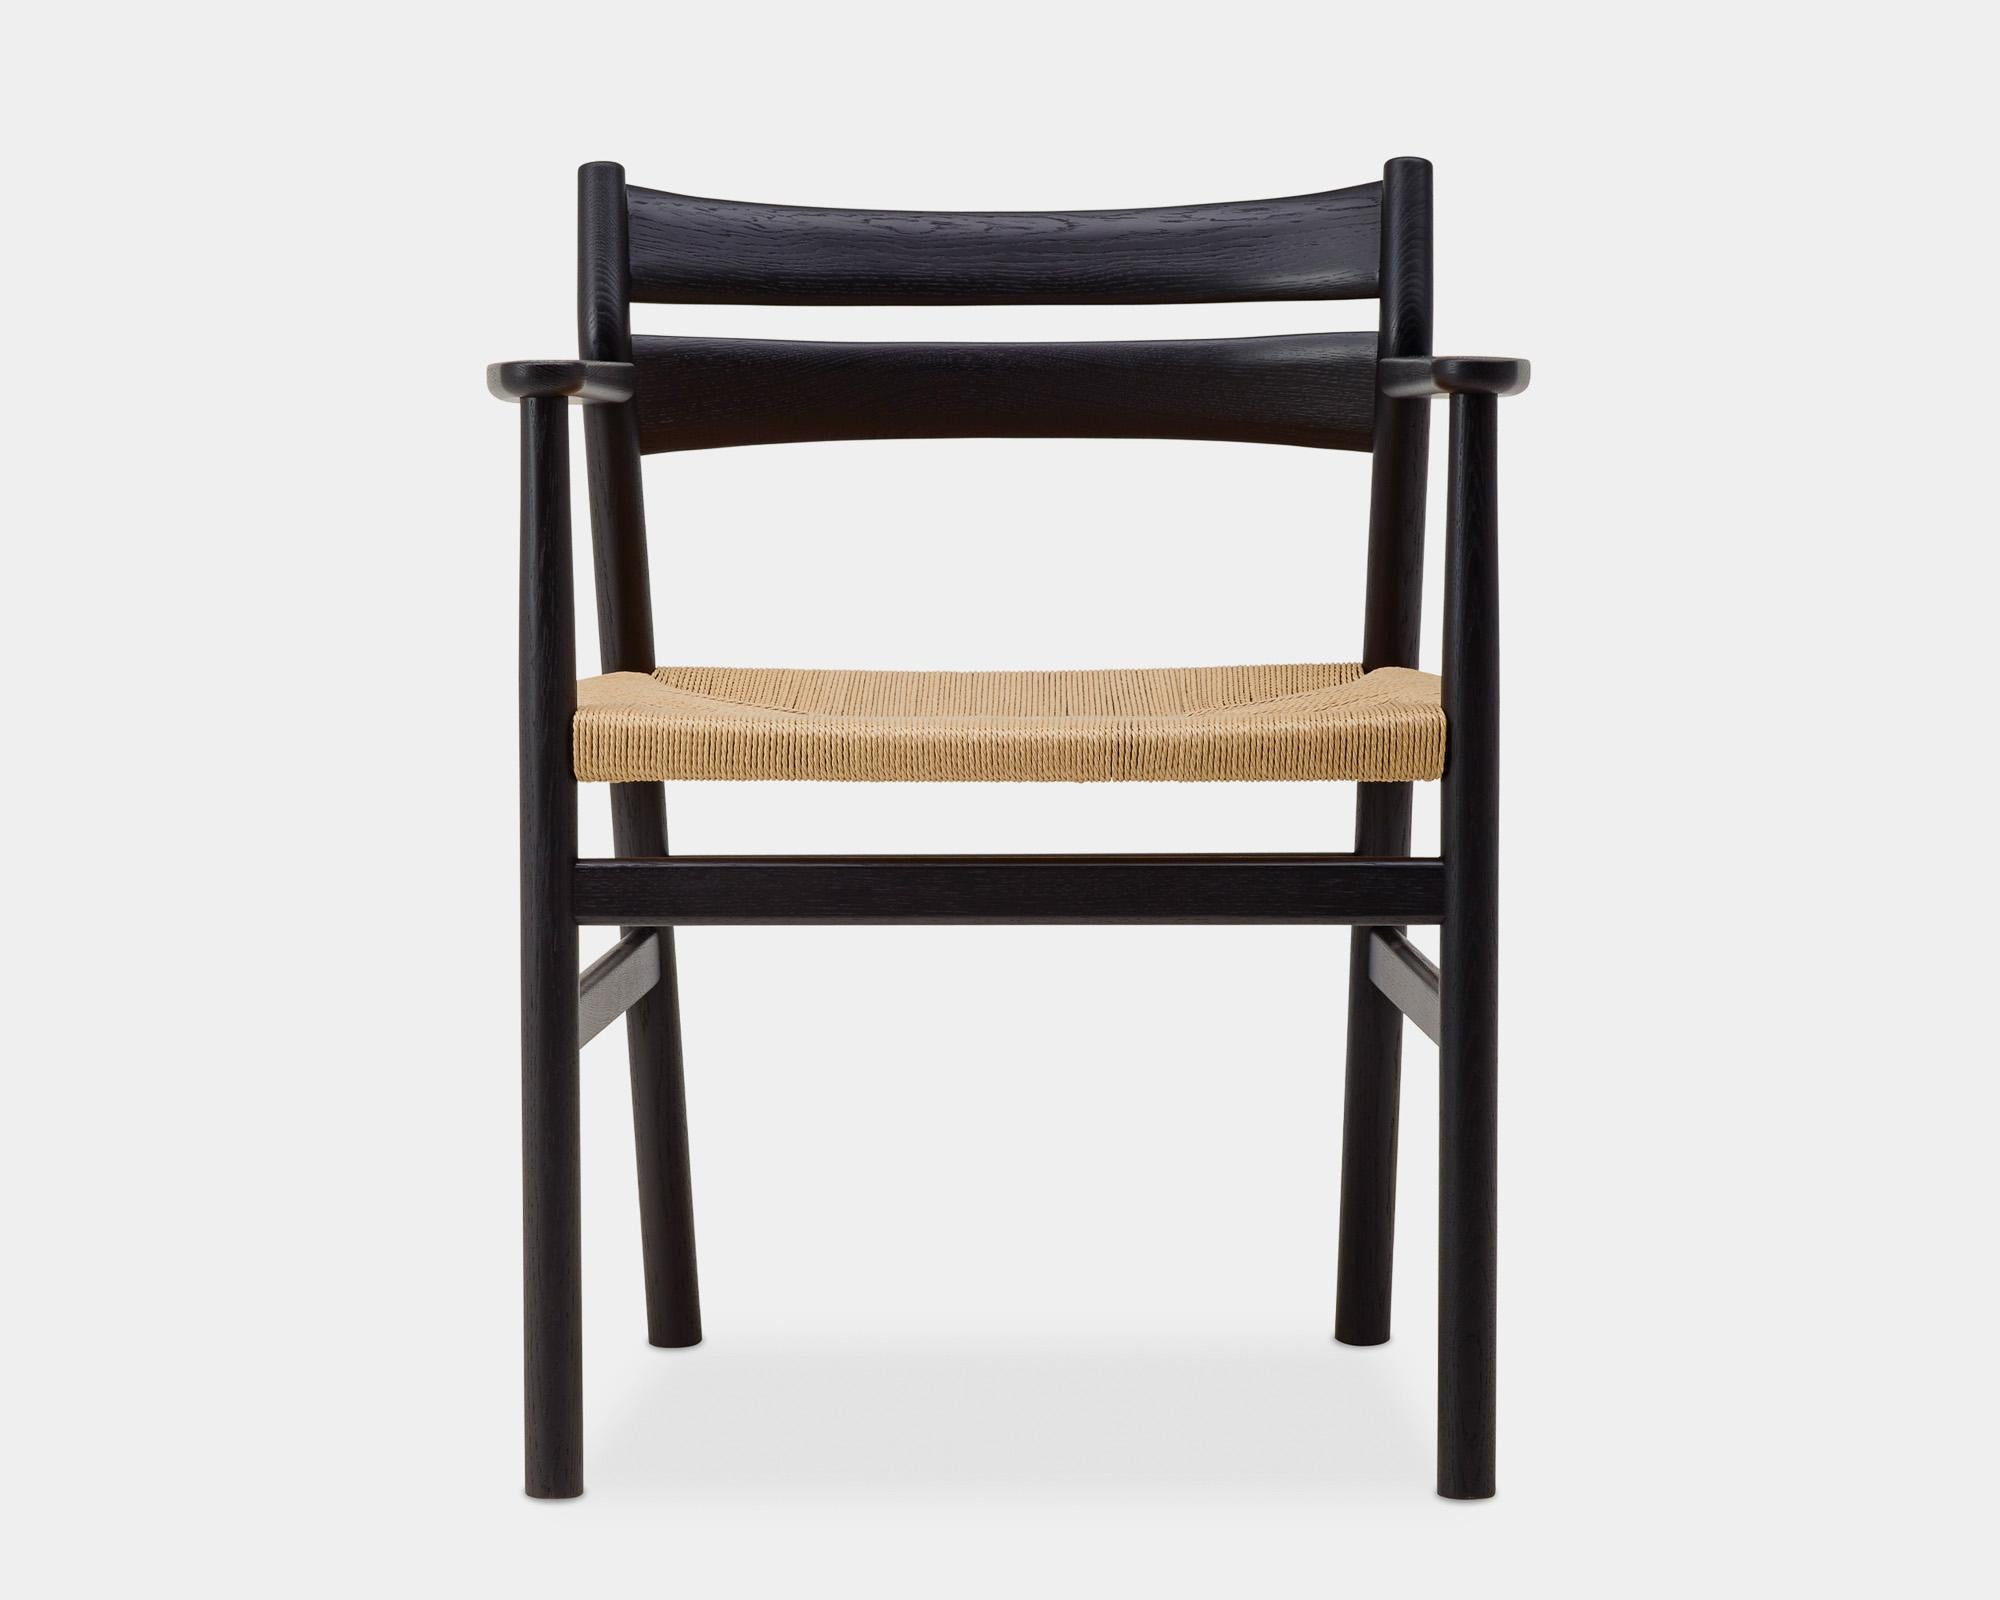 BM2 Chair
Solid oak frame, paper cordel seat
Dimensions : H78 x 44 x 51 cm (seat height 46cm)

Wood:
– Oak
– Smoked oak
– Black lacquered oak

Paper cordel:
– Natural
– Black

-- 
The collection of chairs BM1 and BM2, signed by DK3,